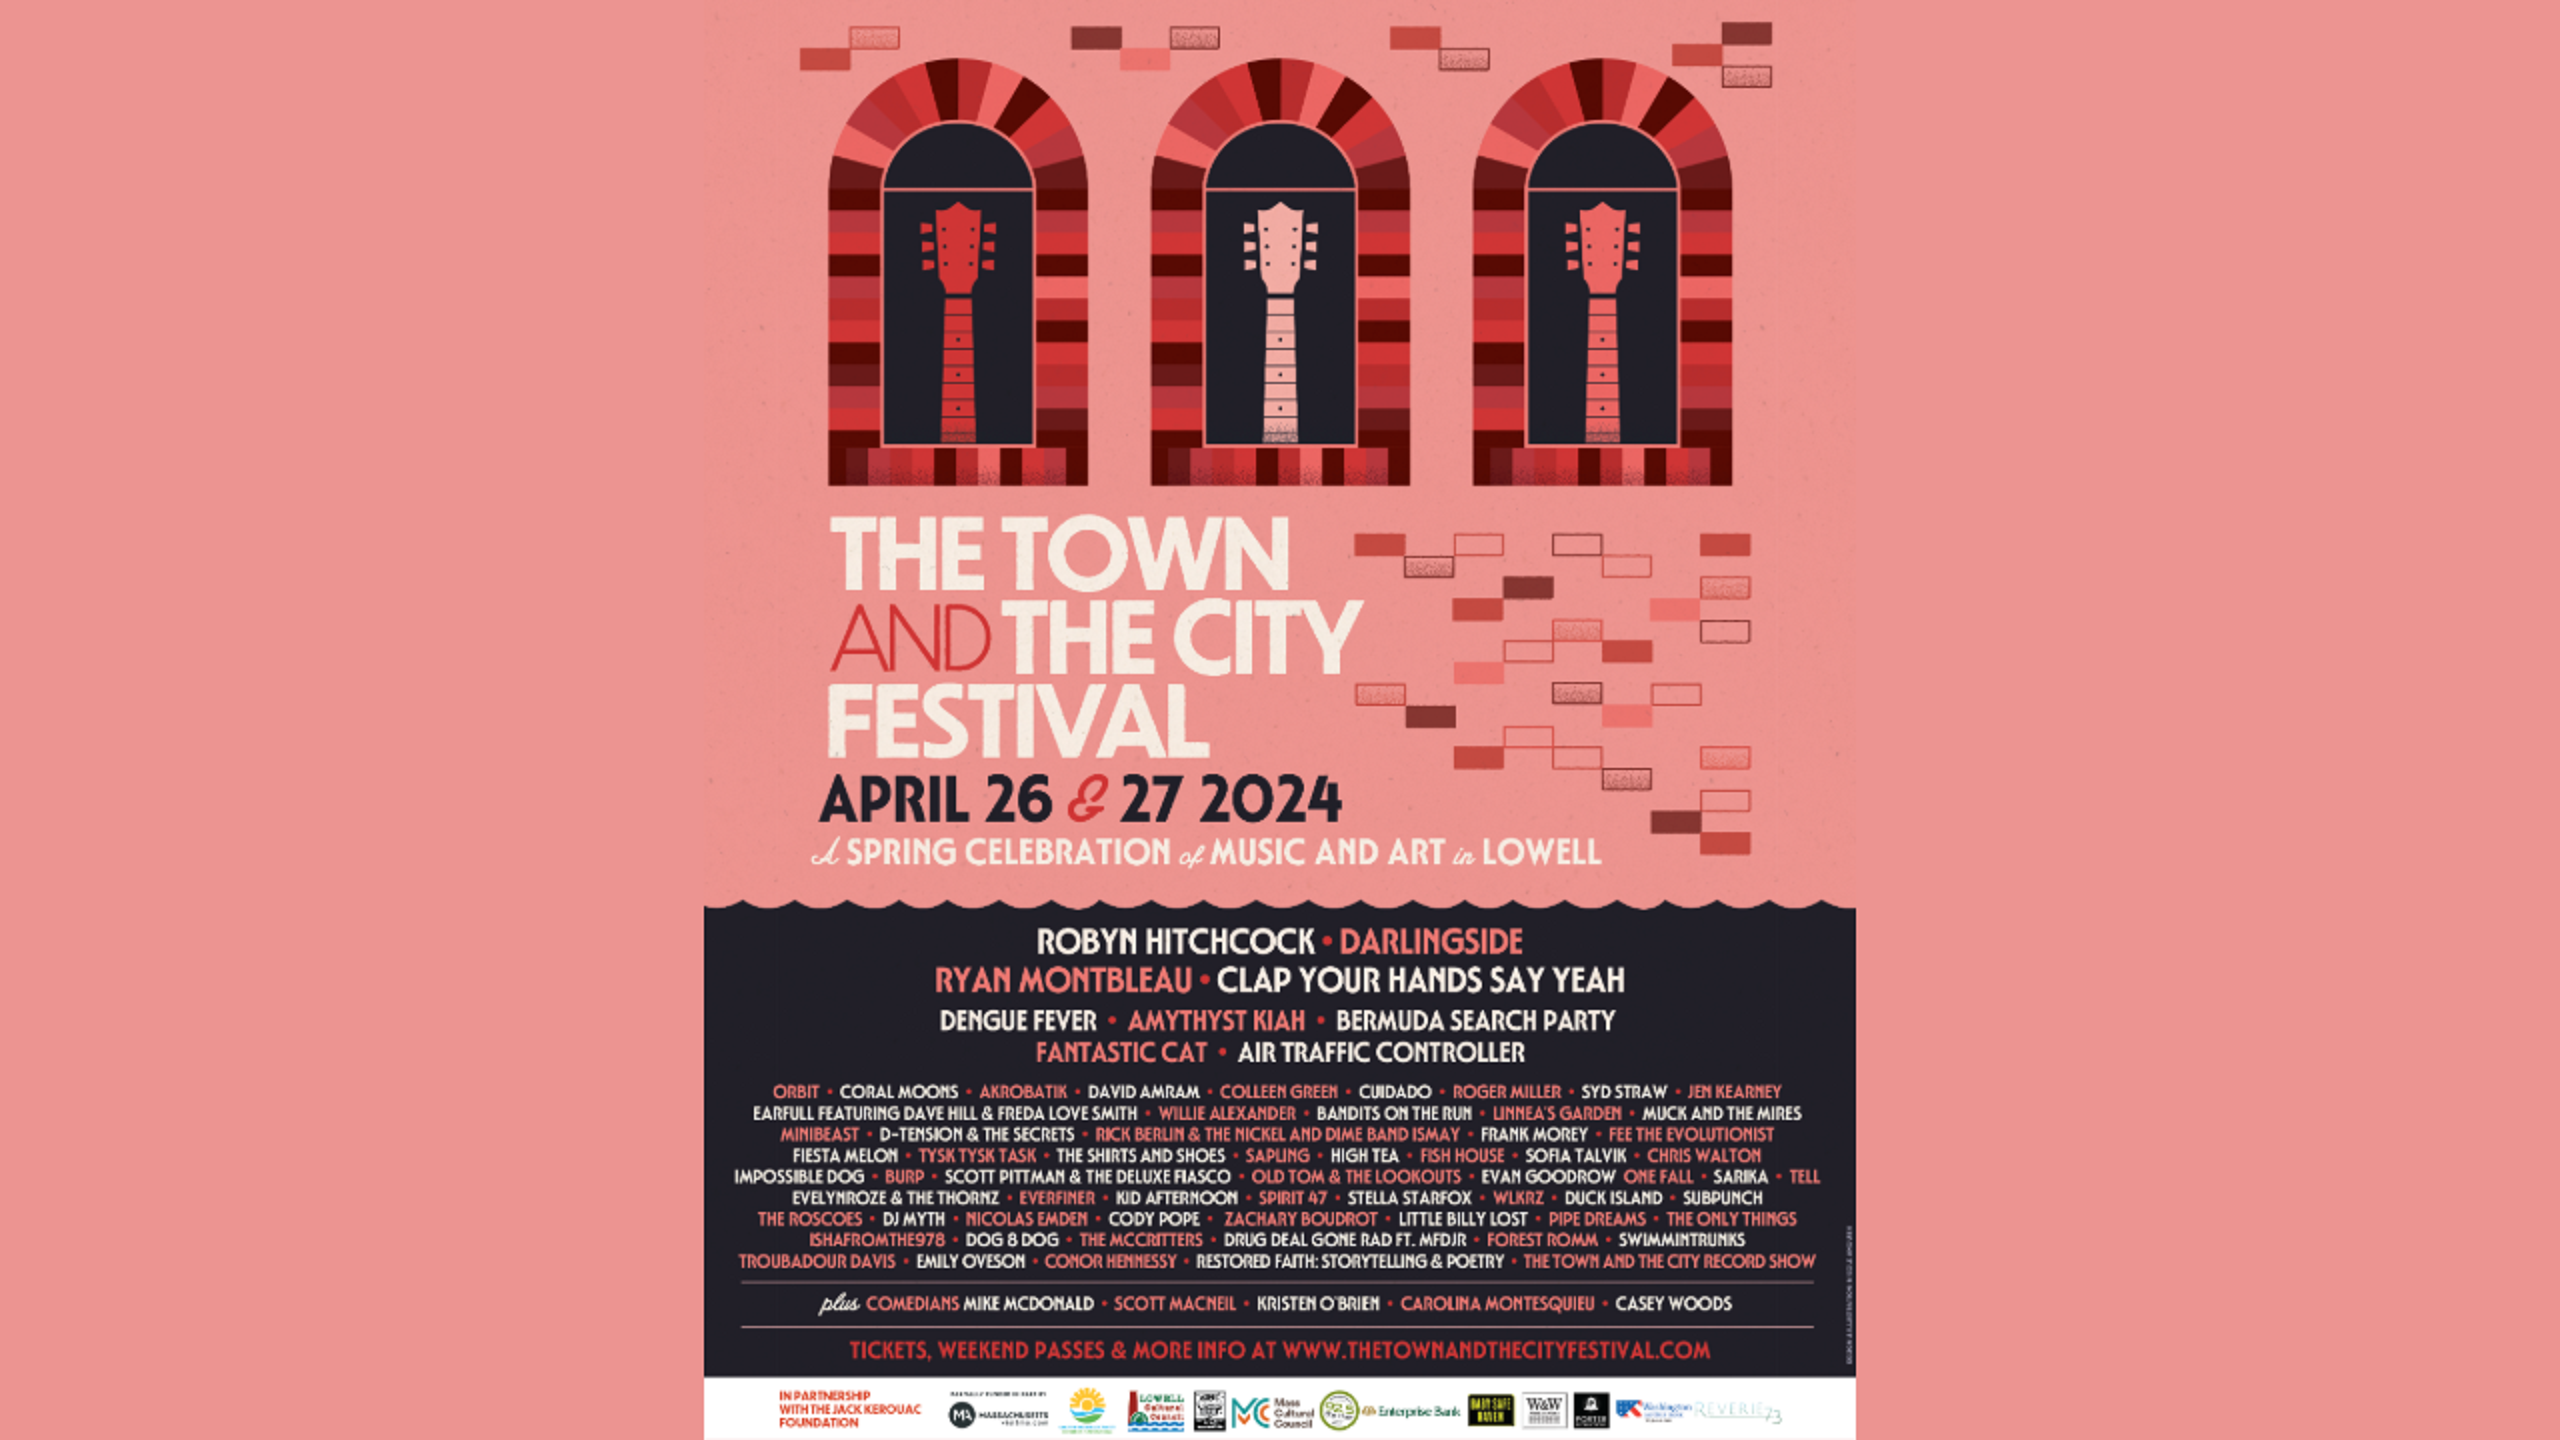 The Town & The City Festival Announces Full Schedule for April 26th-27th in Lowell MA